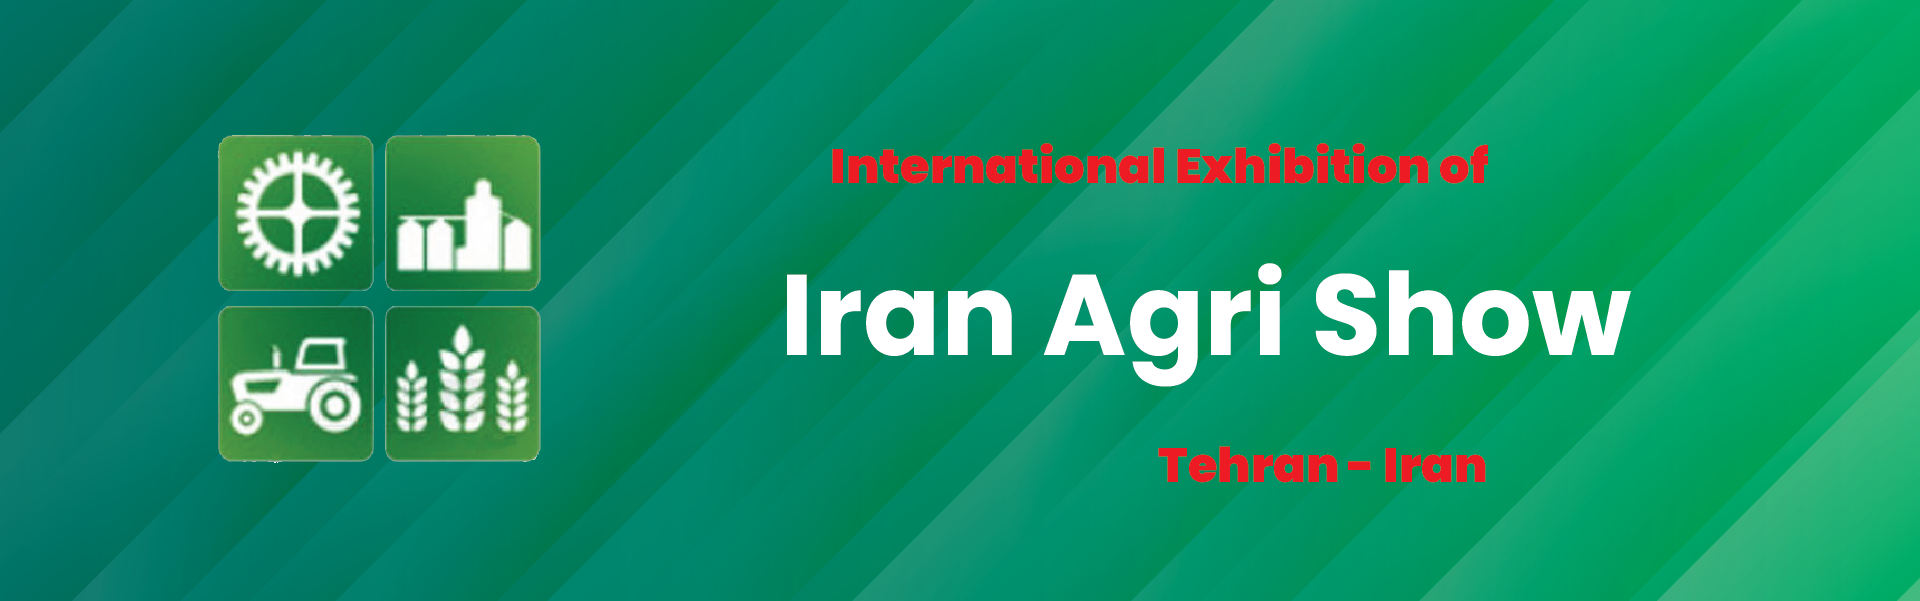 Agriculture Tools Machinery and New Irrigation Input Iran